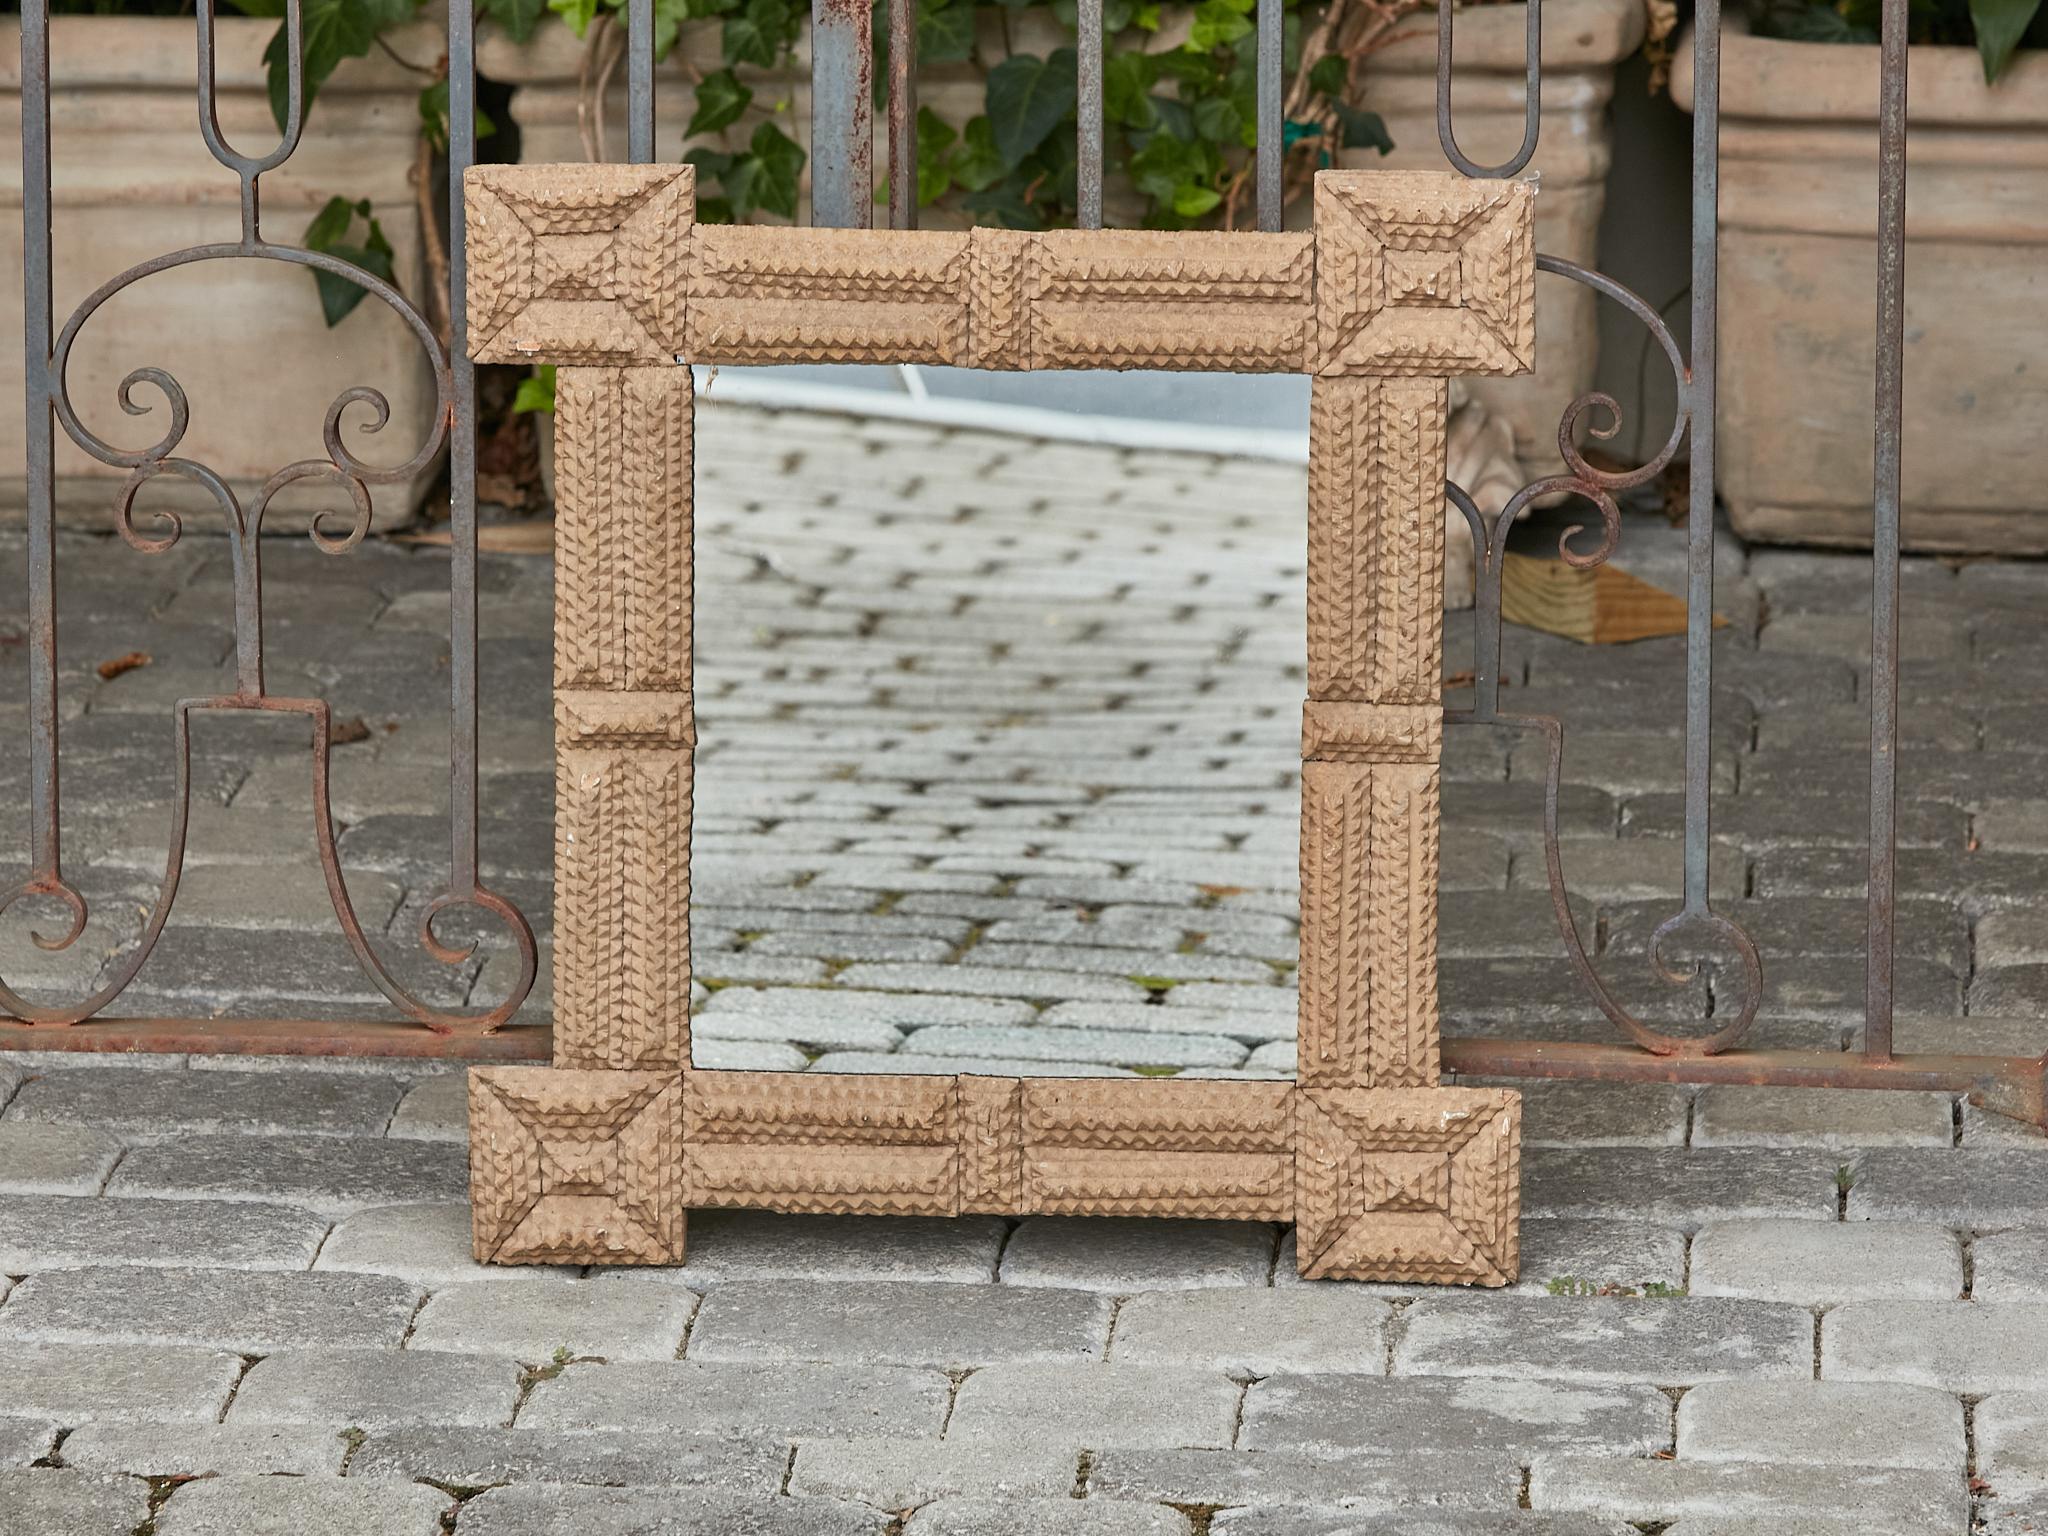 A French Turn of the Century Tramp Art hand-carved wooden mirror from circa 1900 with square protruding corners. Step back in time and embrace the rustic charm of this exquisite French Turn of the Century Tramp Art hand-carved wooden mirror from